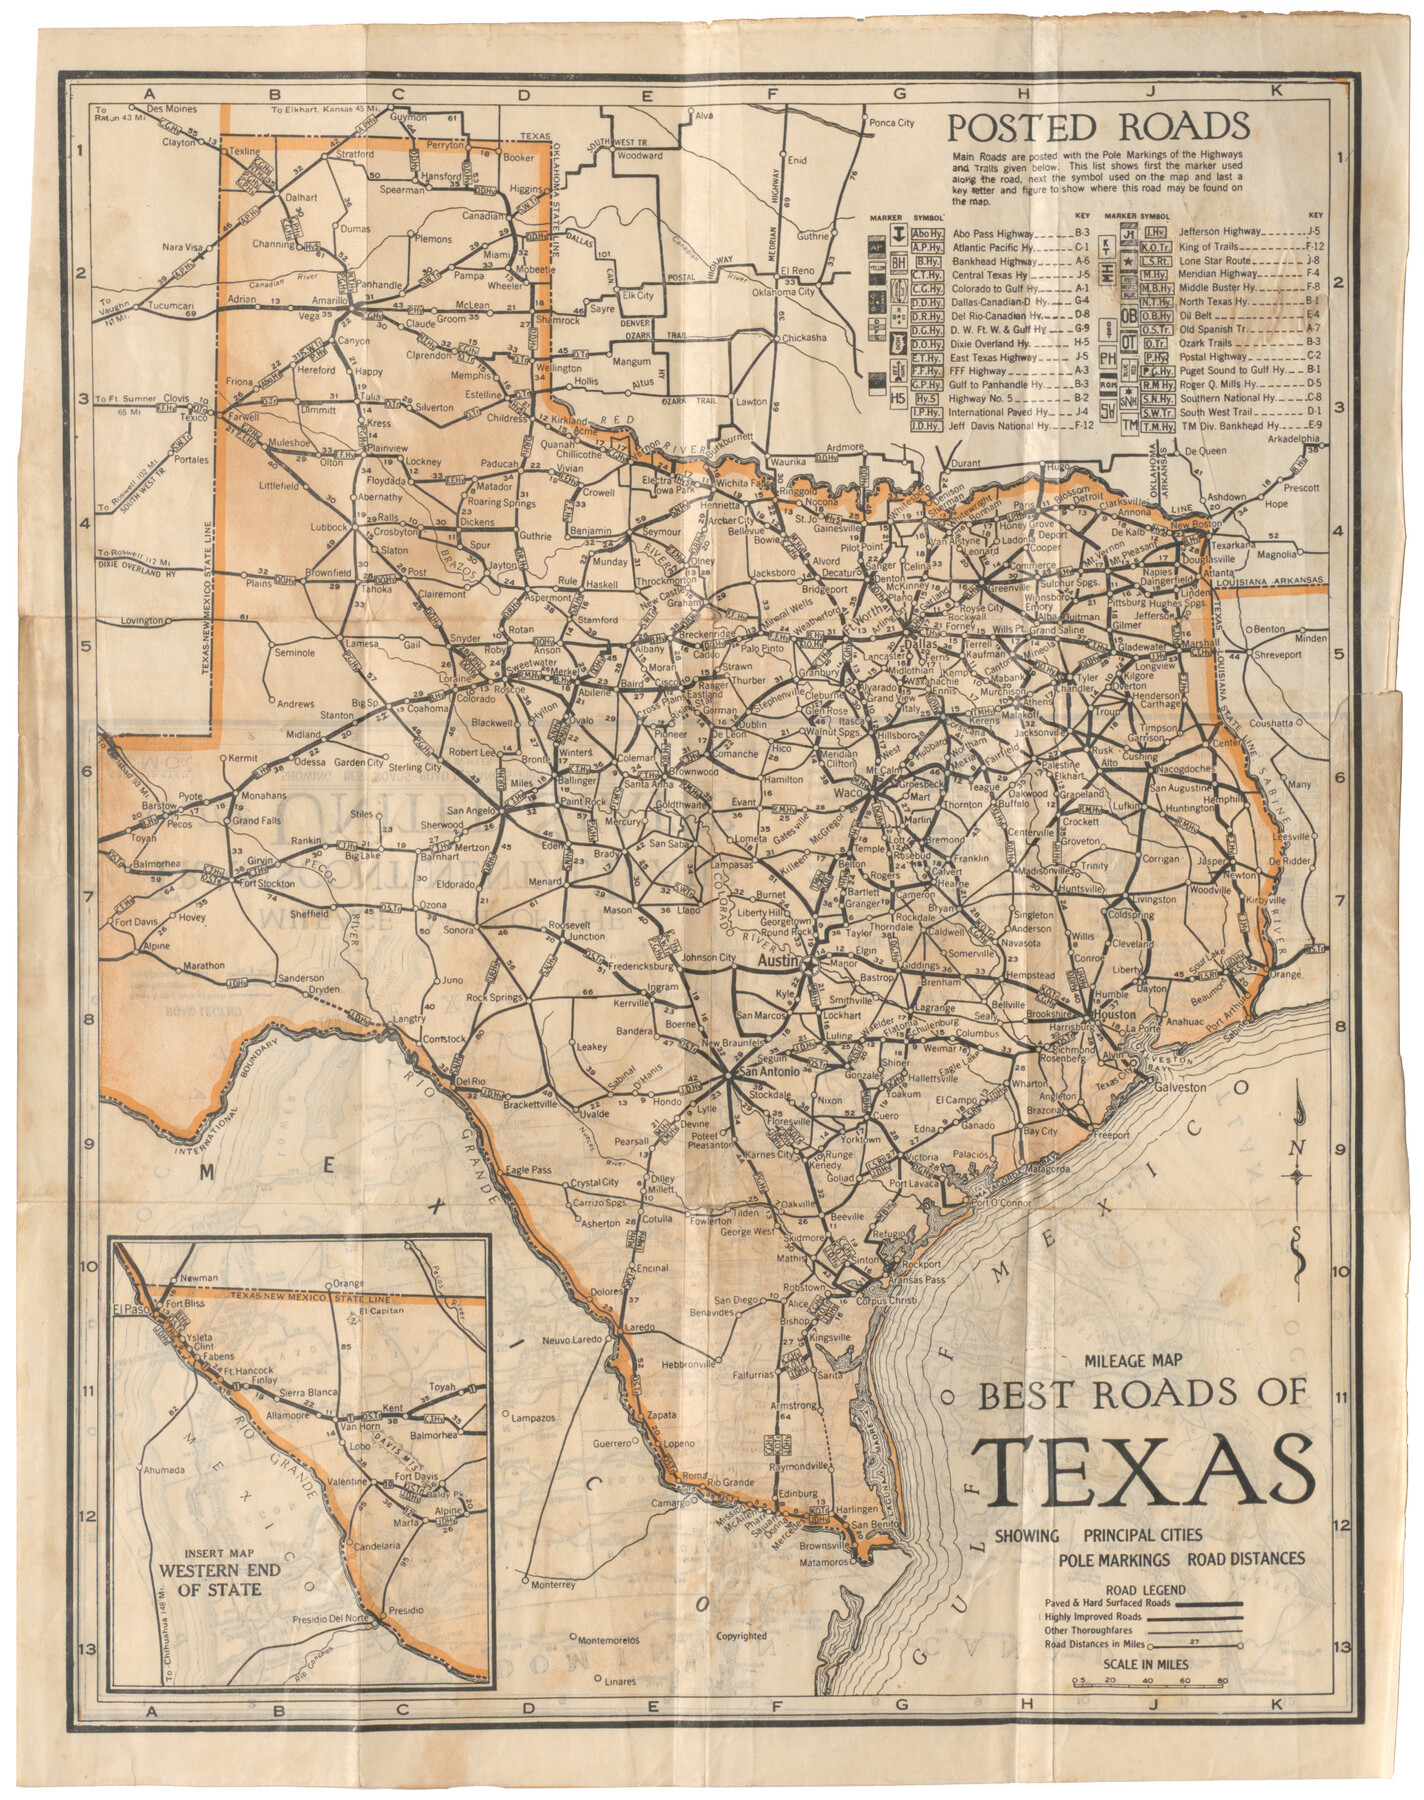 Mileage Map Best Roads of Texas showing principal cities, pole